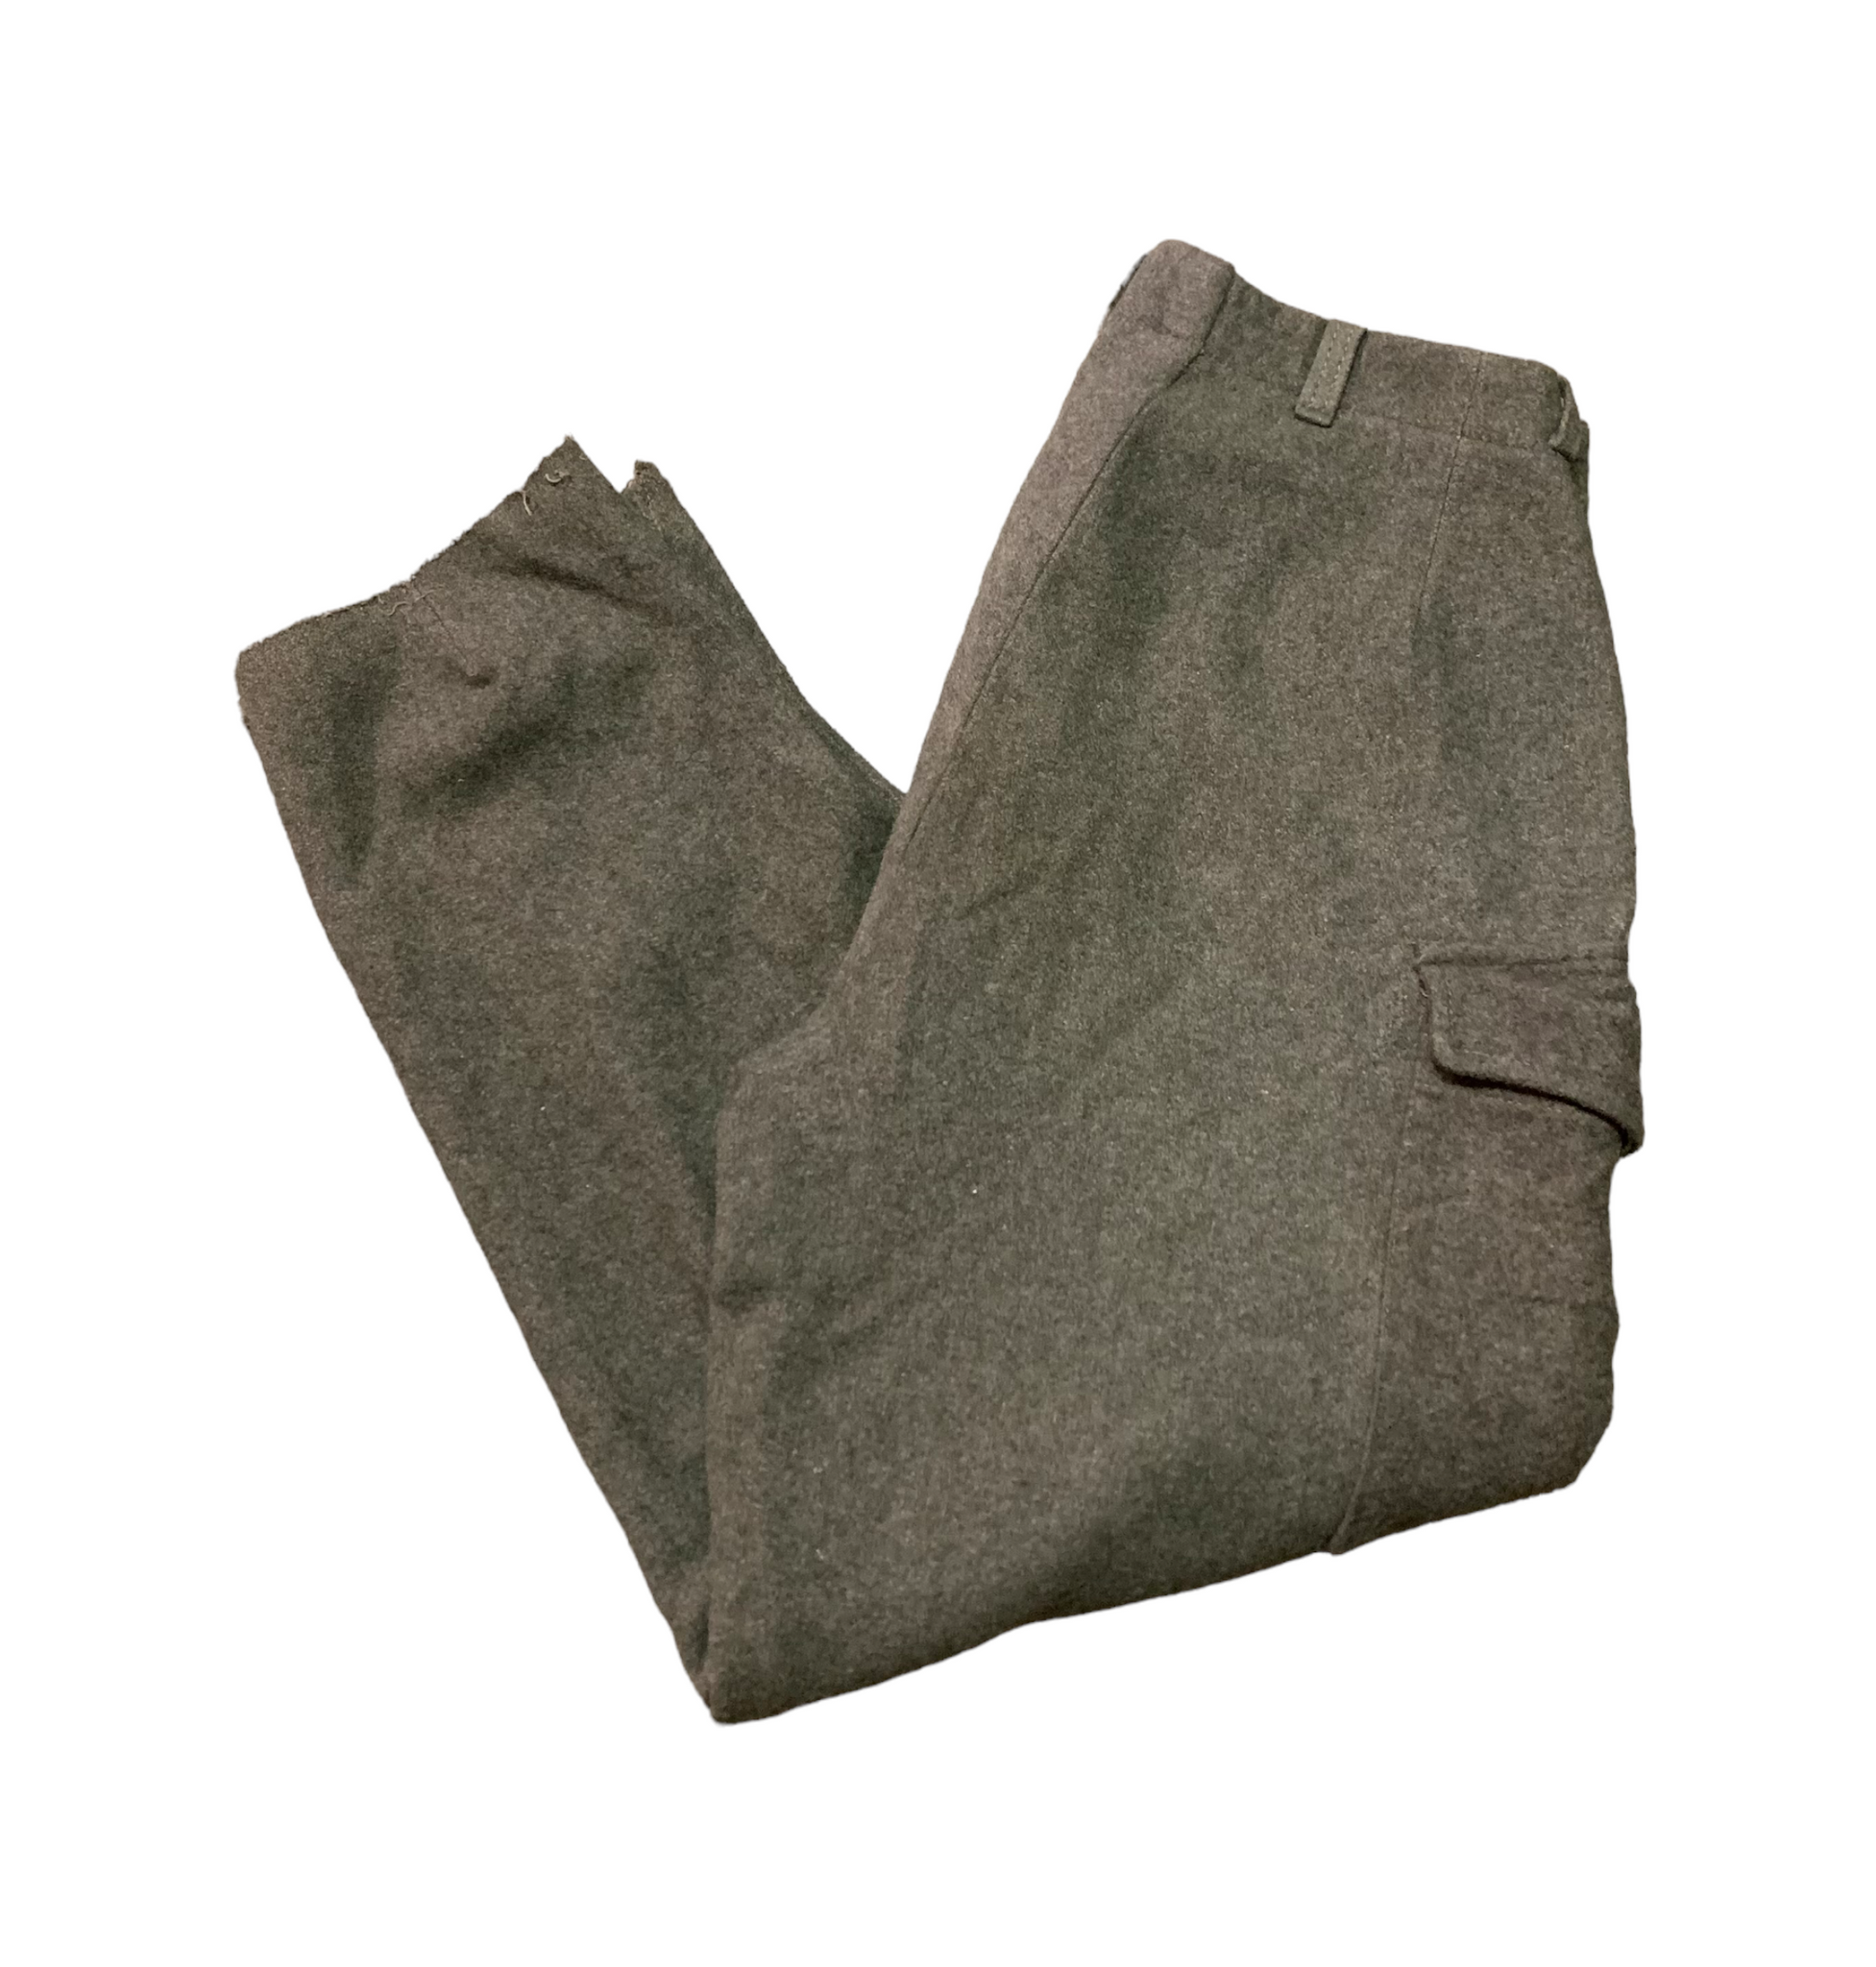 Vintage military Wool Pants dated 1951 – Roy's Army Surplus & Collectables